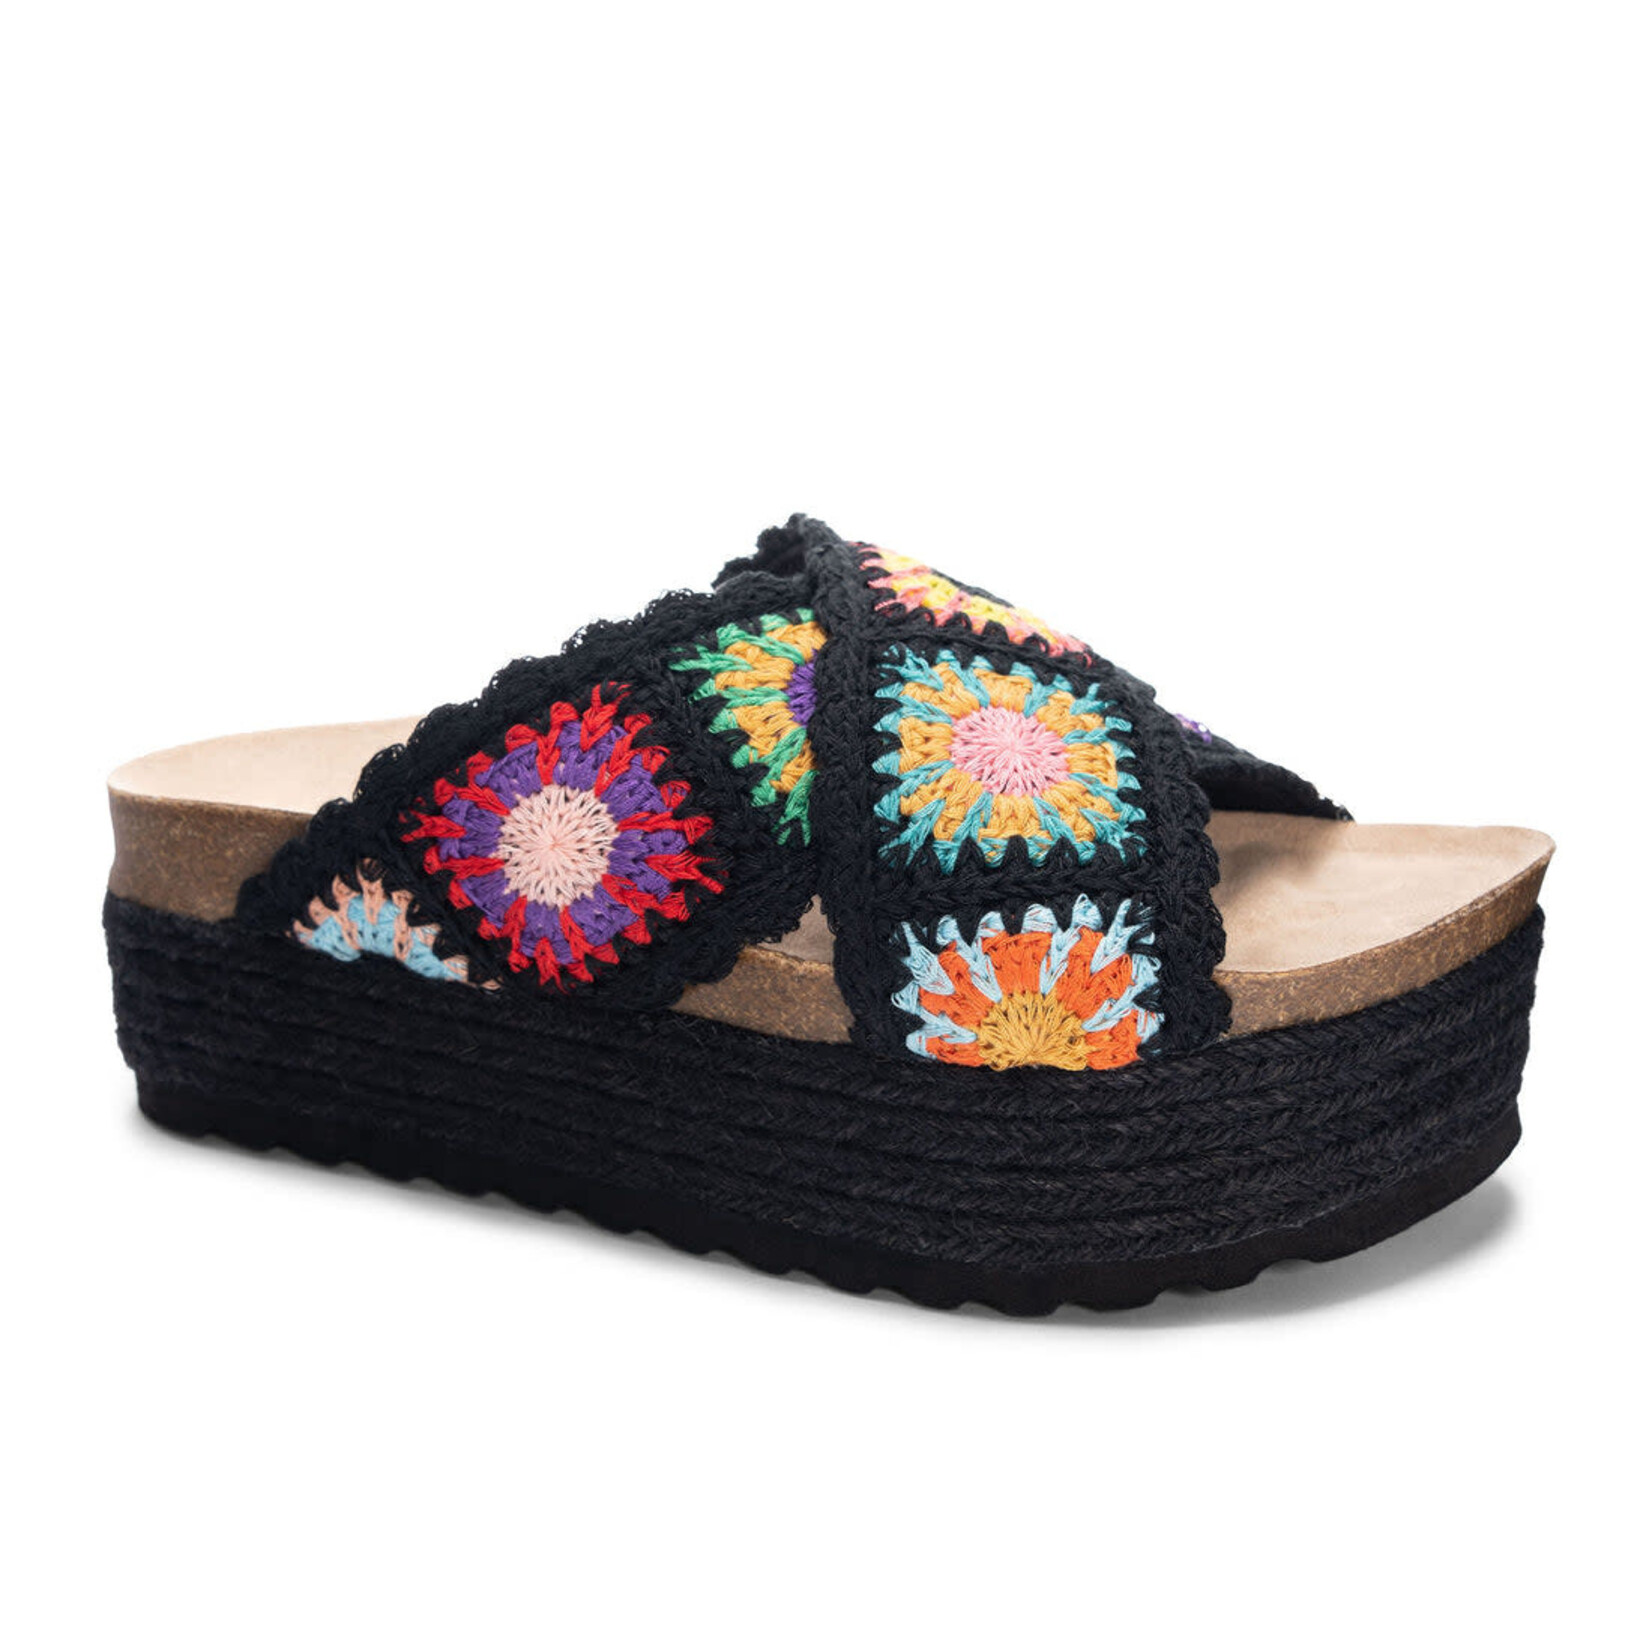 Chinese Laundry Plays in Black Crochet Slides by Chinese Laundry